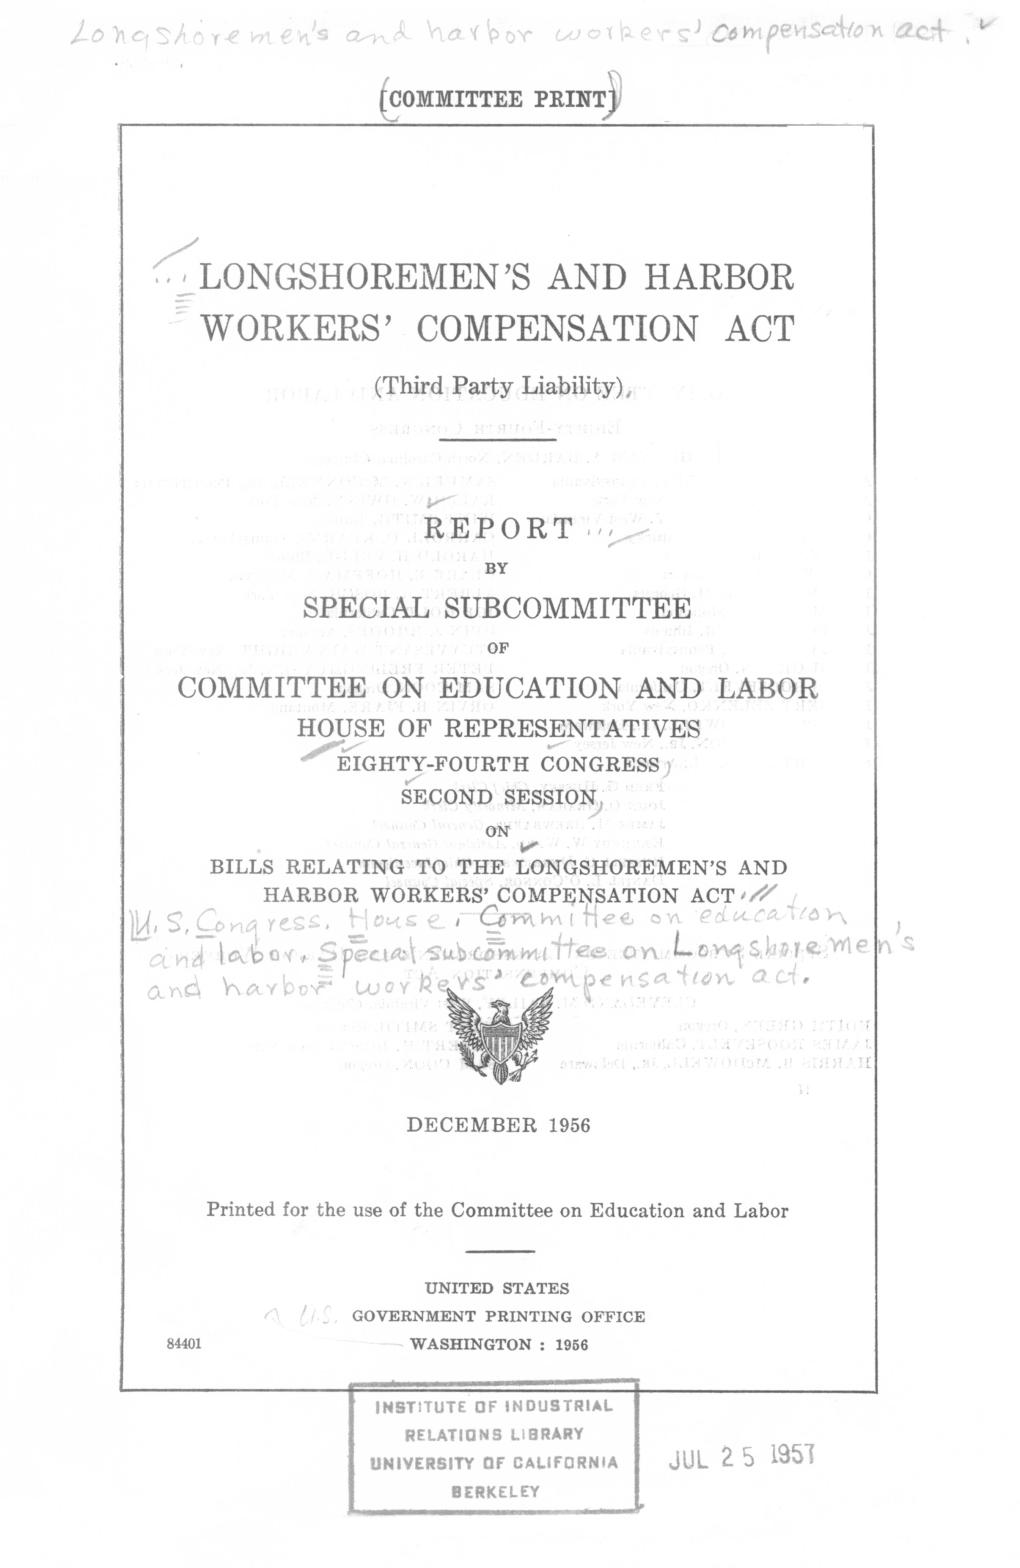 LONGSHOREMEN's and HARBOR WORKERS' COMPENSATION ACT (Third Party Liability)